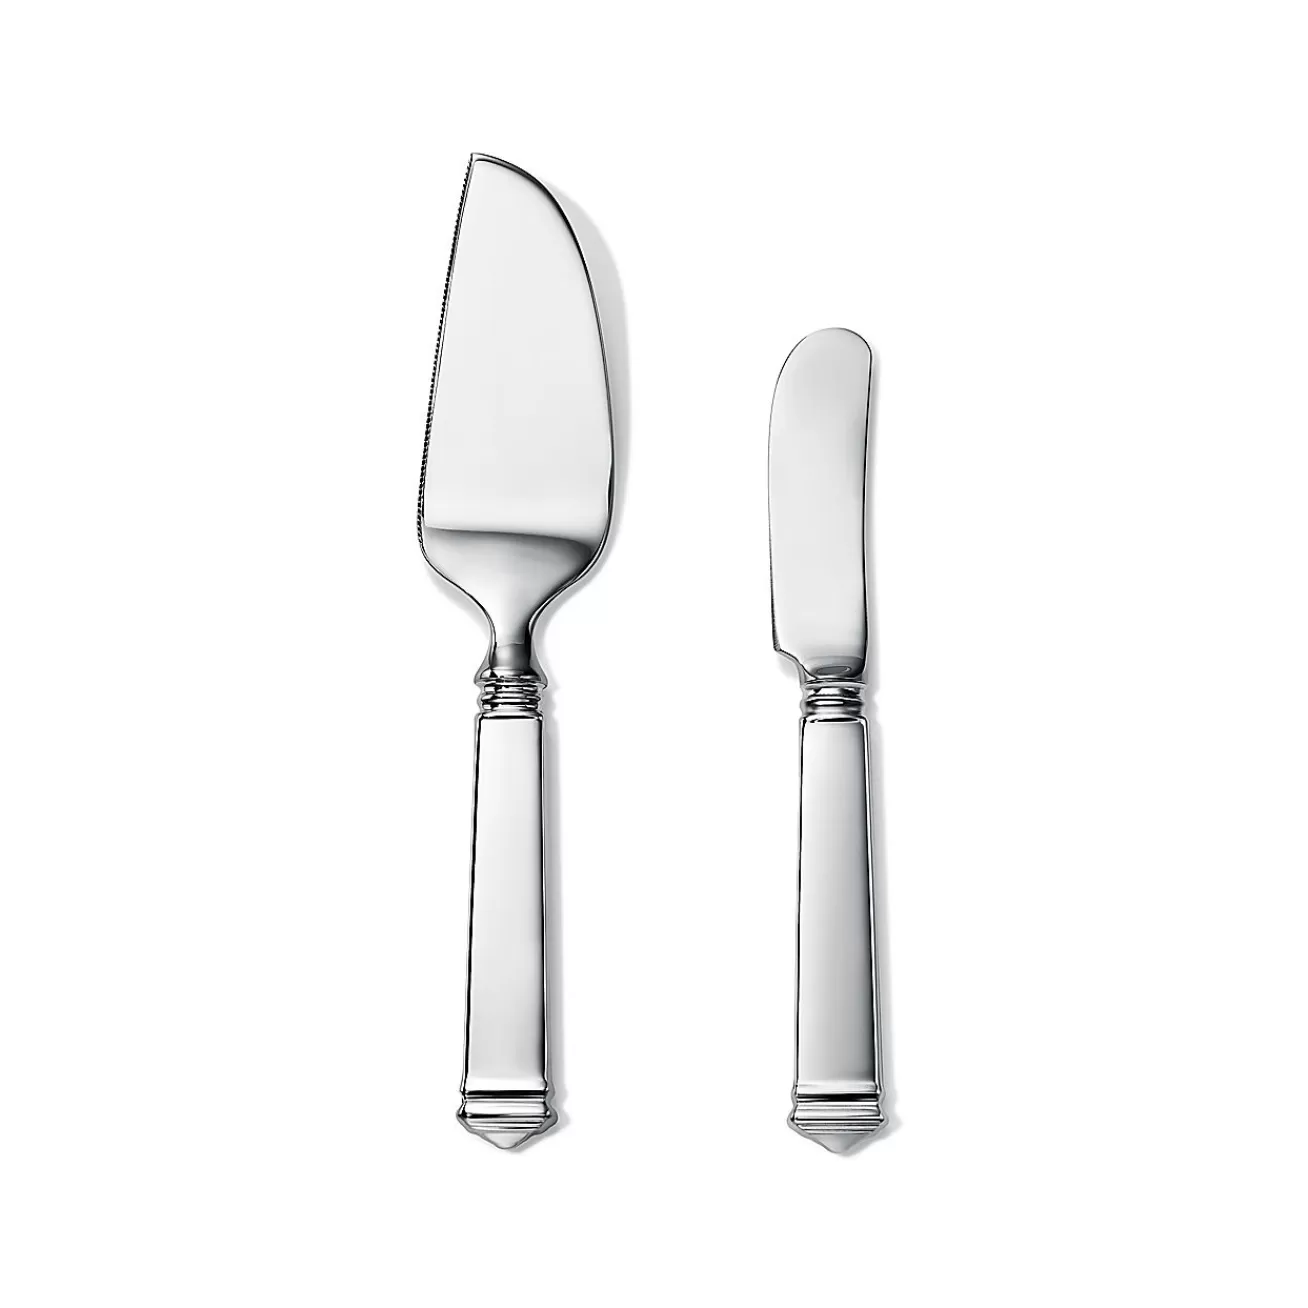 Tiffany & Co. Hampton cheese knife and server in sterling silver. | ^ Tableware | Flatware & Trays